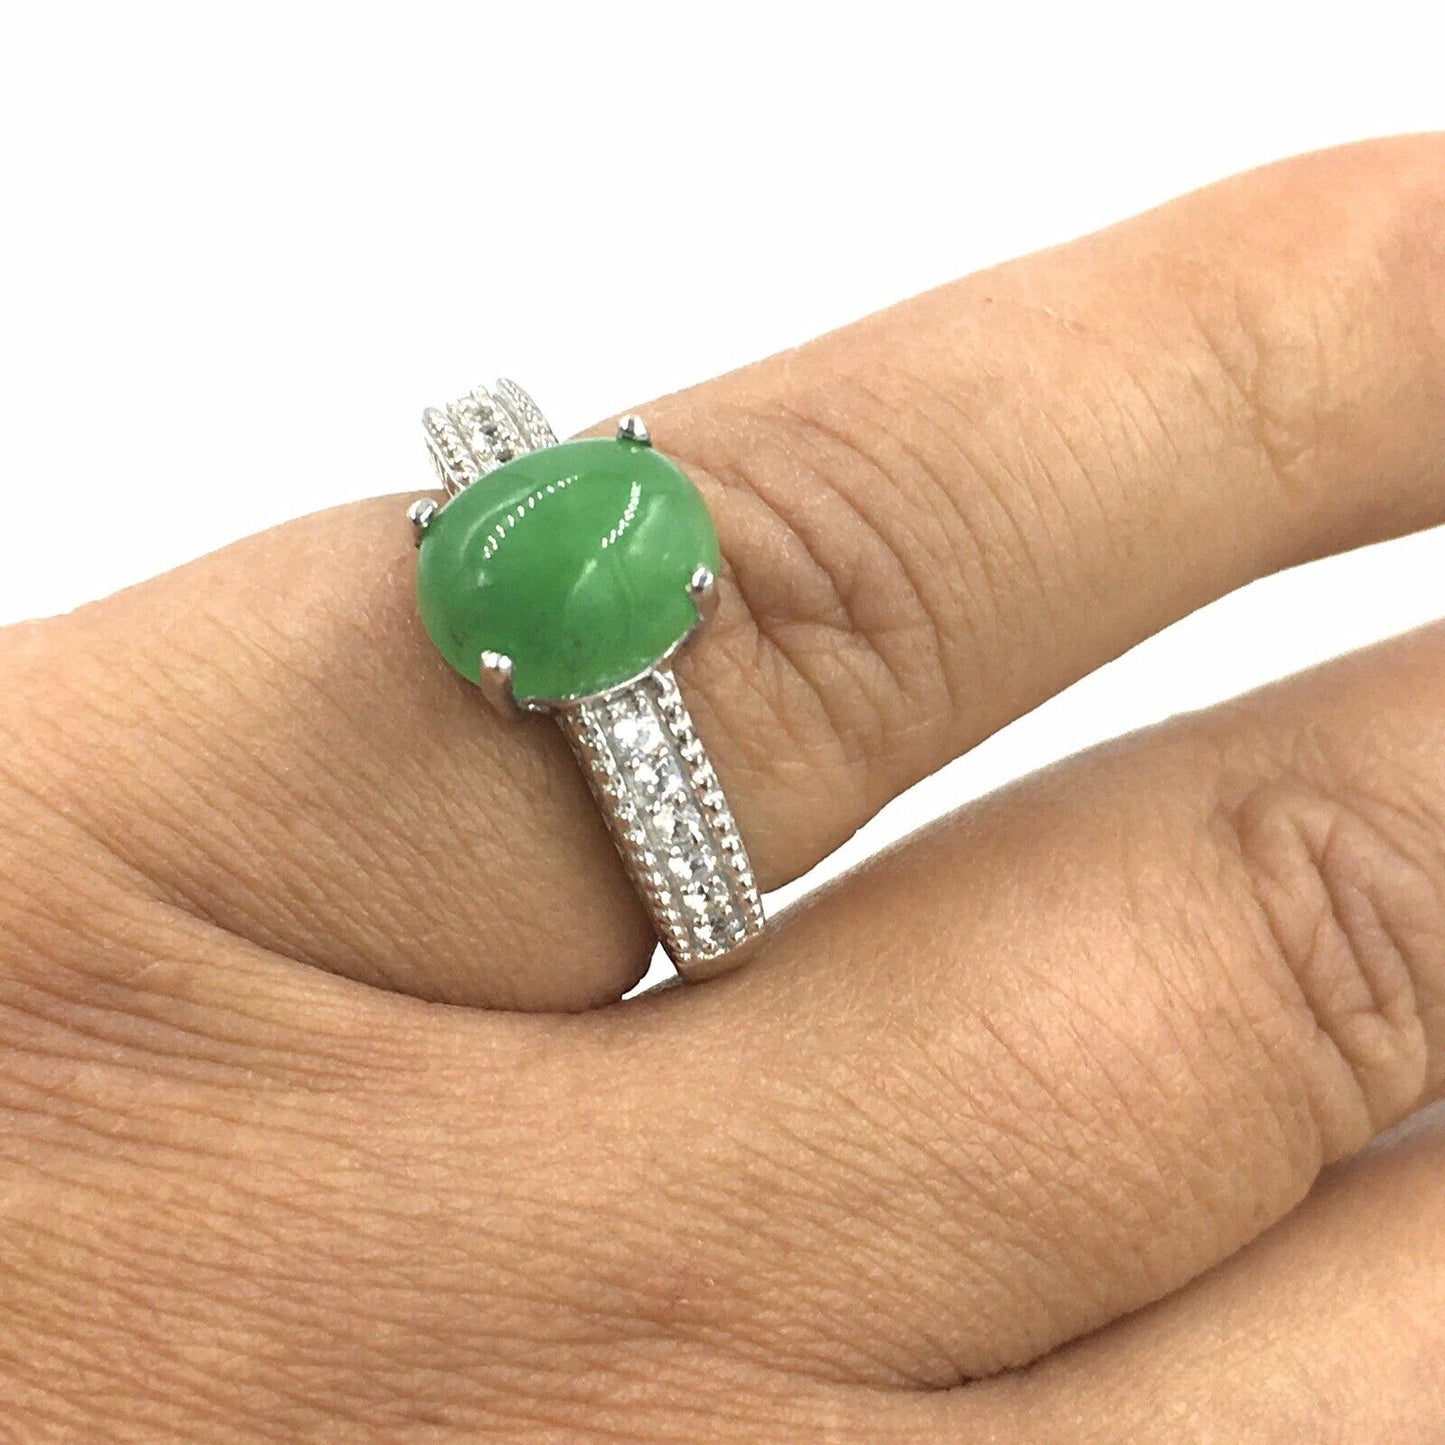 Sts Chuck Clemency Jade Spinel Sterling Silver Ring Size 7